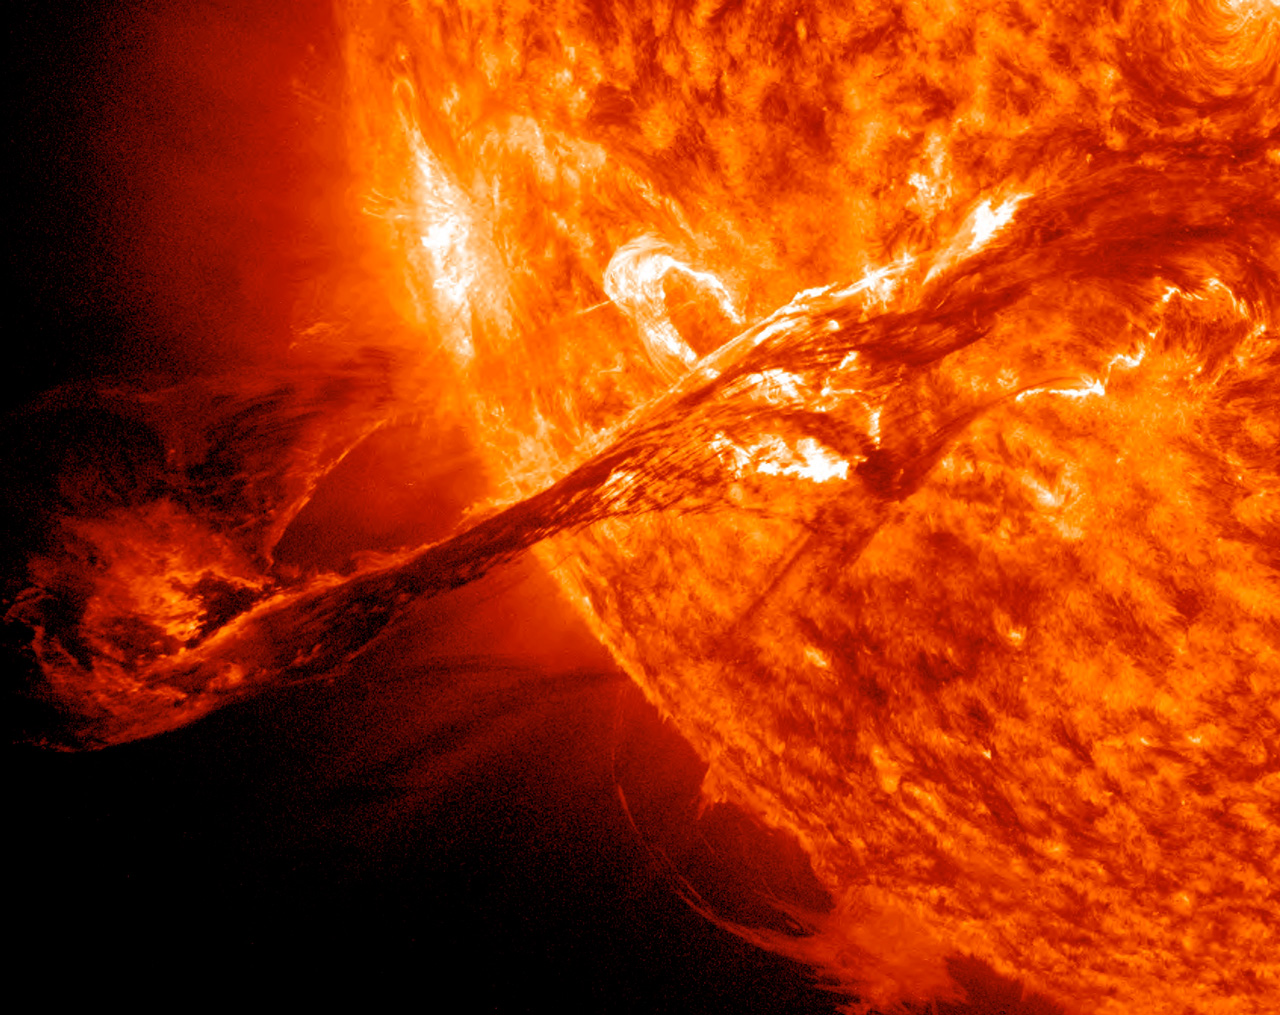 This close-up, detailed image of the Sun, captured by NASA's Solar Dynamics Observatory (SDO), shows a giant solar prominence erupting off of the Sun, like a giant loop of fire.